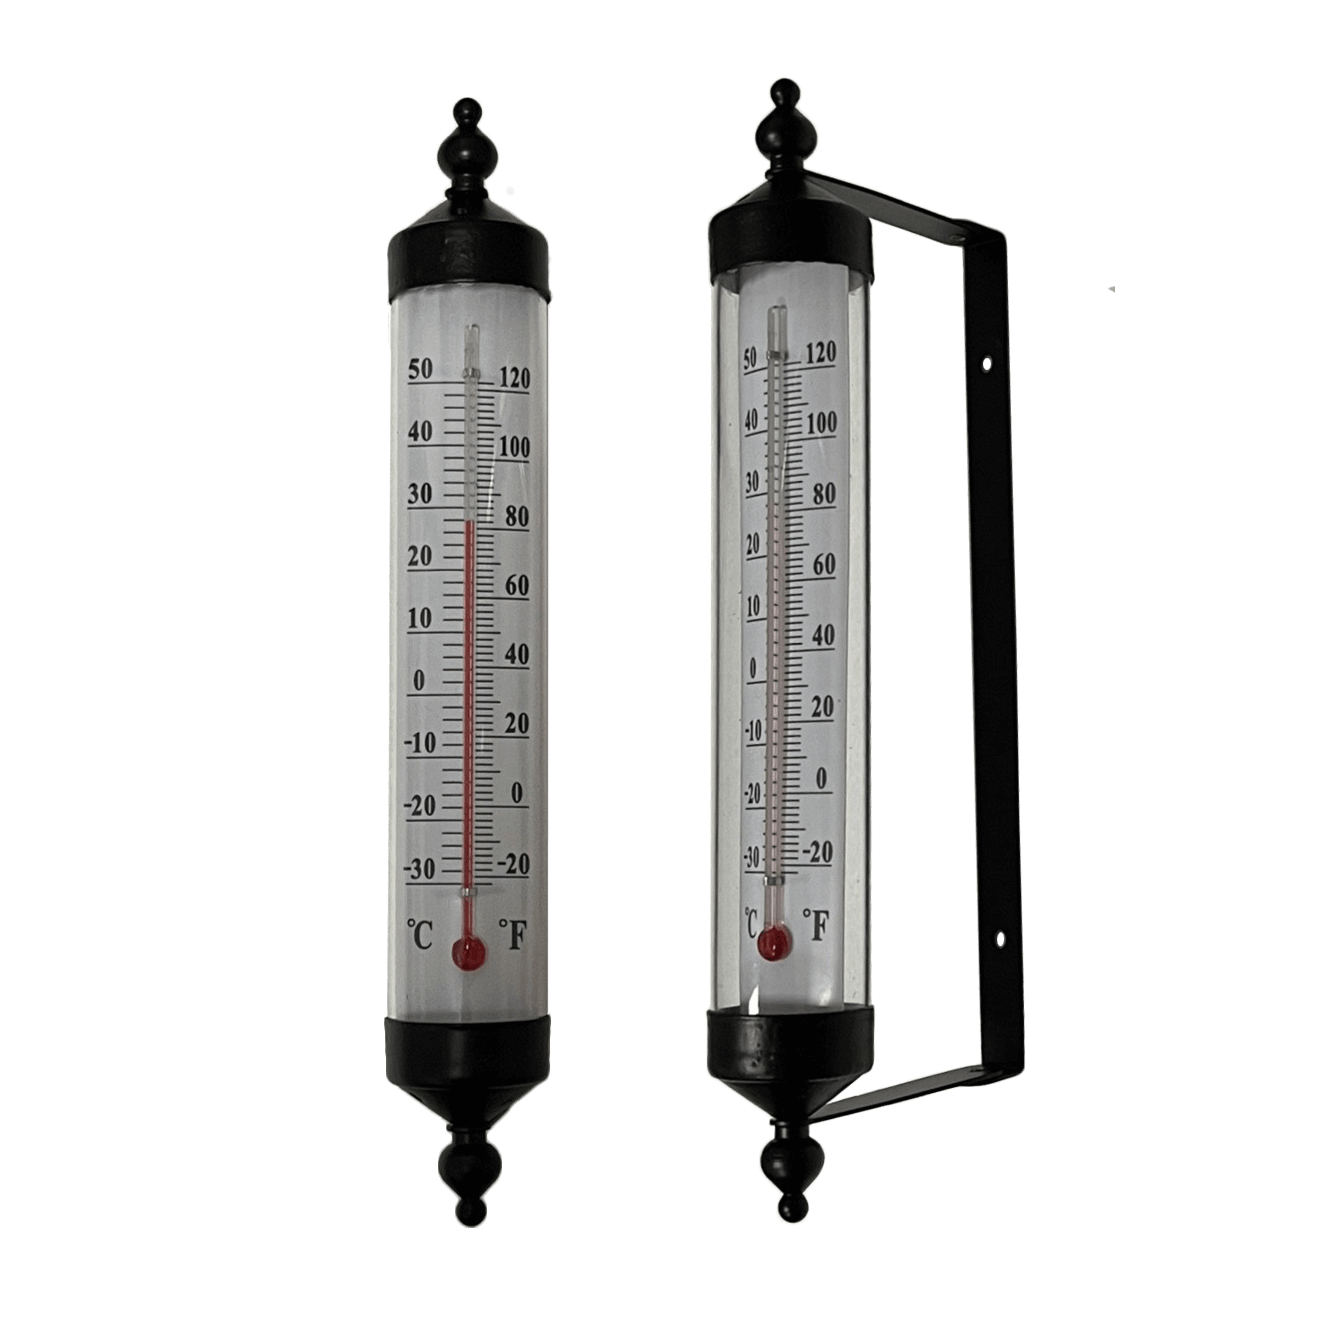 Exquisite Waterproof Outdoor Decorative Wall Thermometer HYP017 2